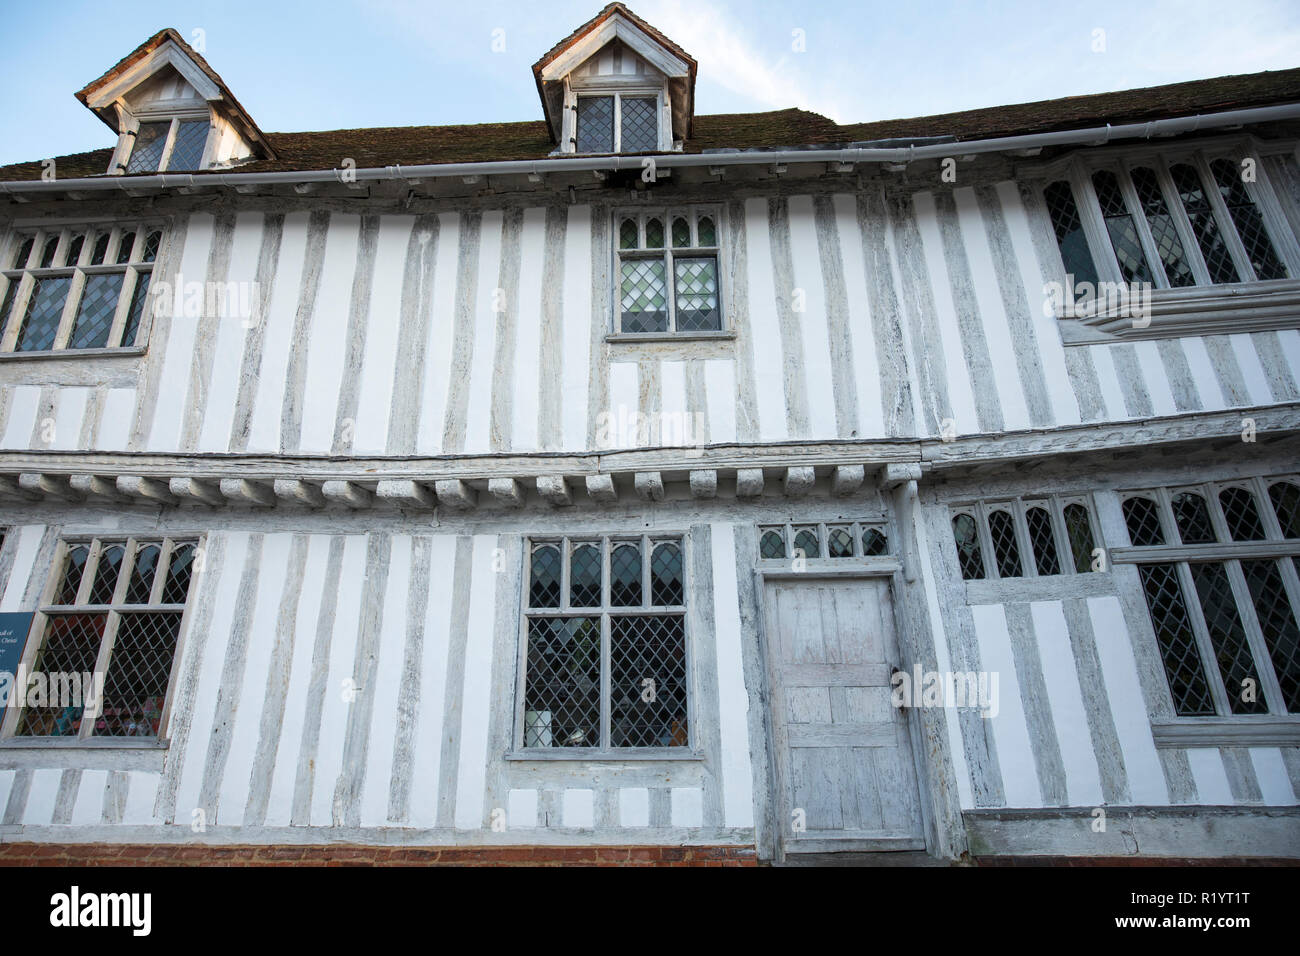 Ancient architecture of Guildhall of Corpus Christi, Grade I listed timber-framed property with leaded light windows in quaint historic town of Lavenh Stock Photo